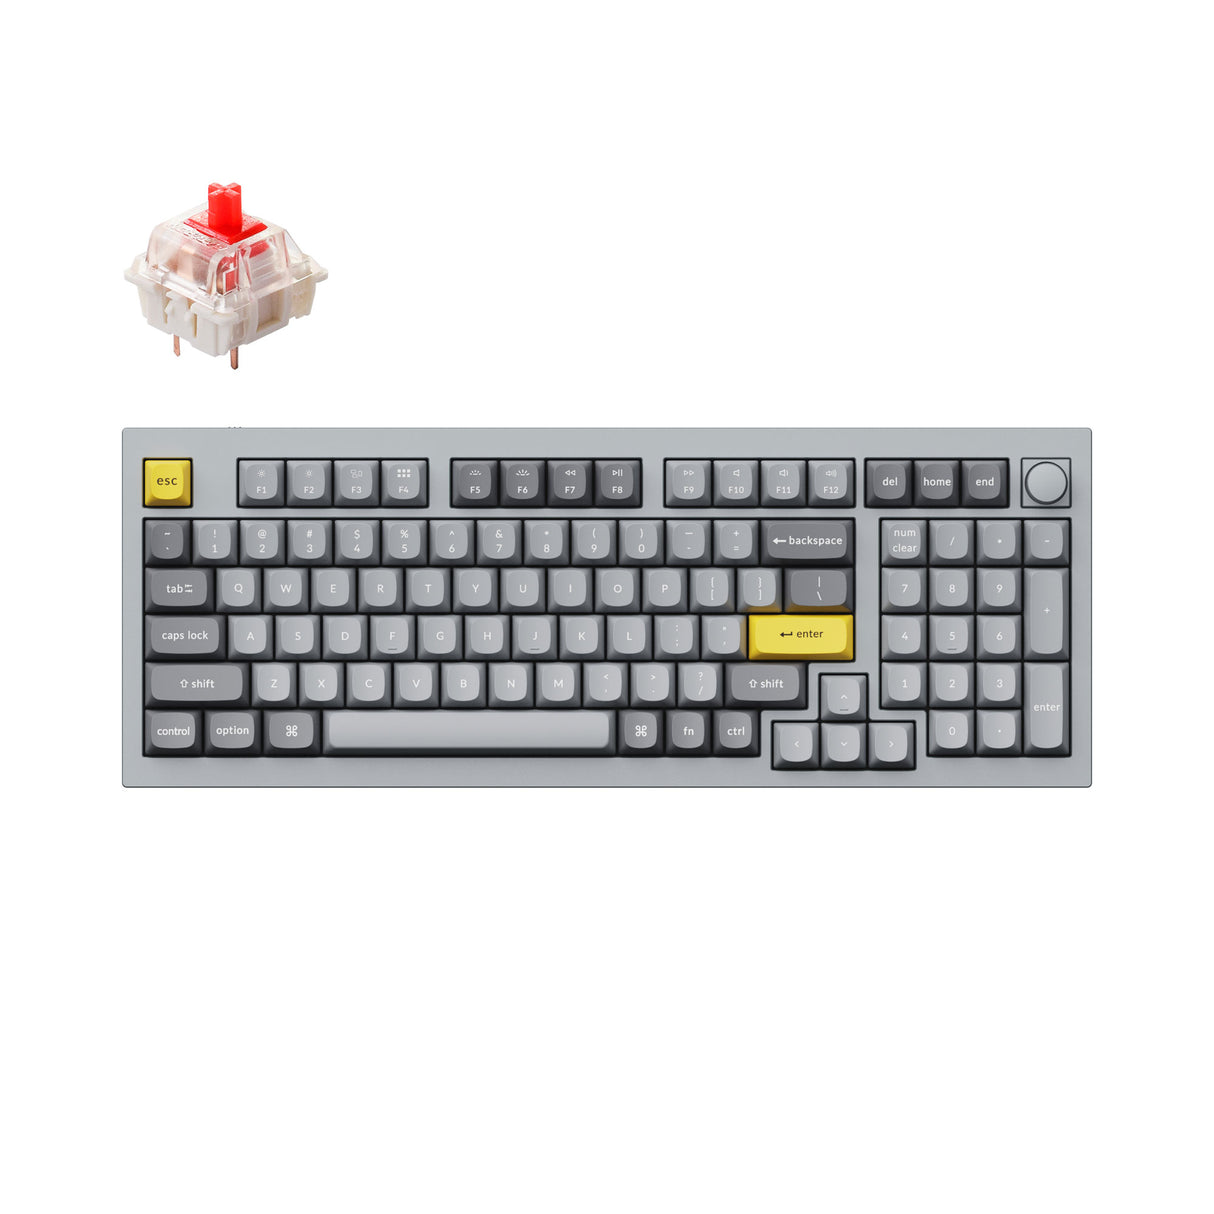 Keychron Q5 QMK VIA custom mechanical keyboard 1800 compact 96 percent layout full aluminum grey frame knob for Mac Windows RGB backlight with hot swappable Gateron G Pro switch red